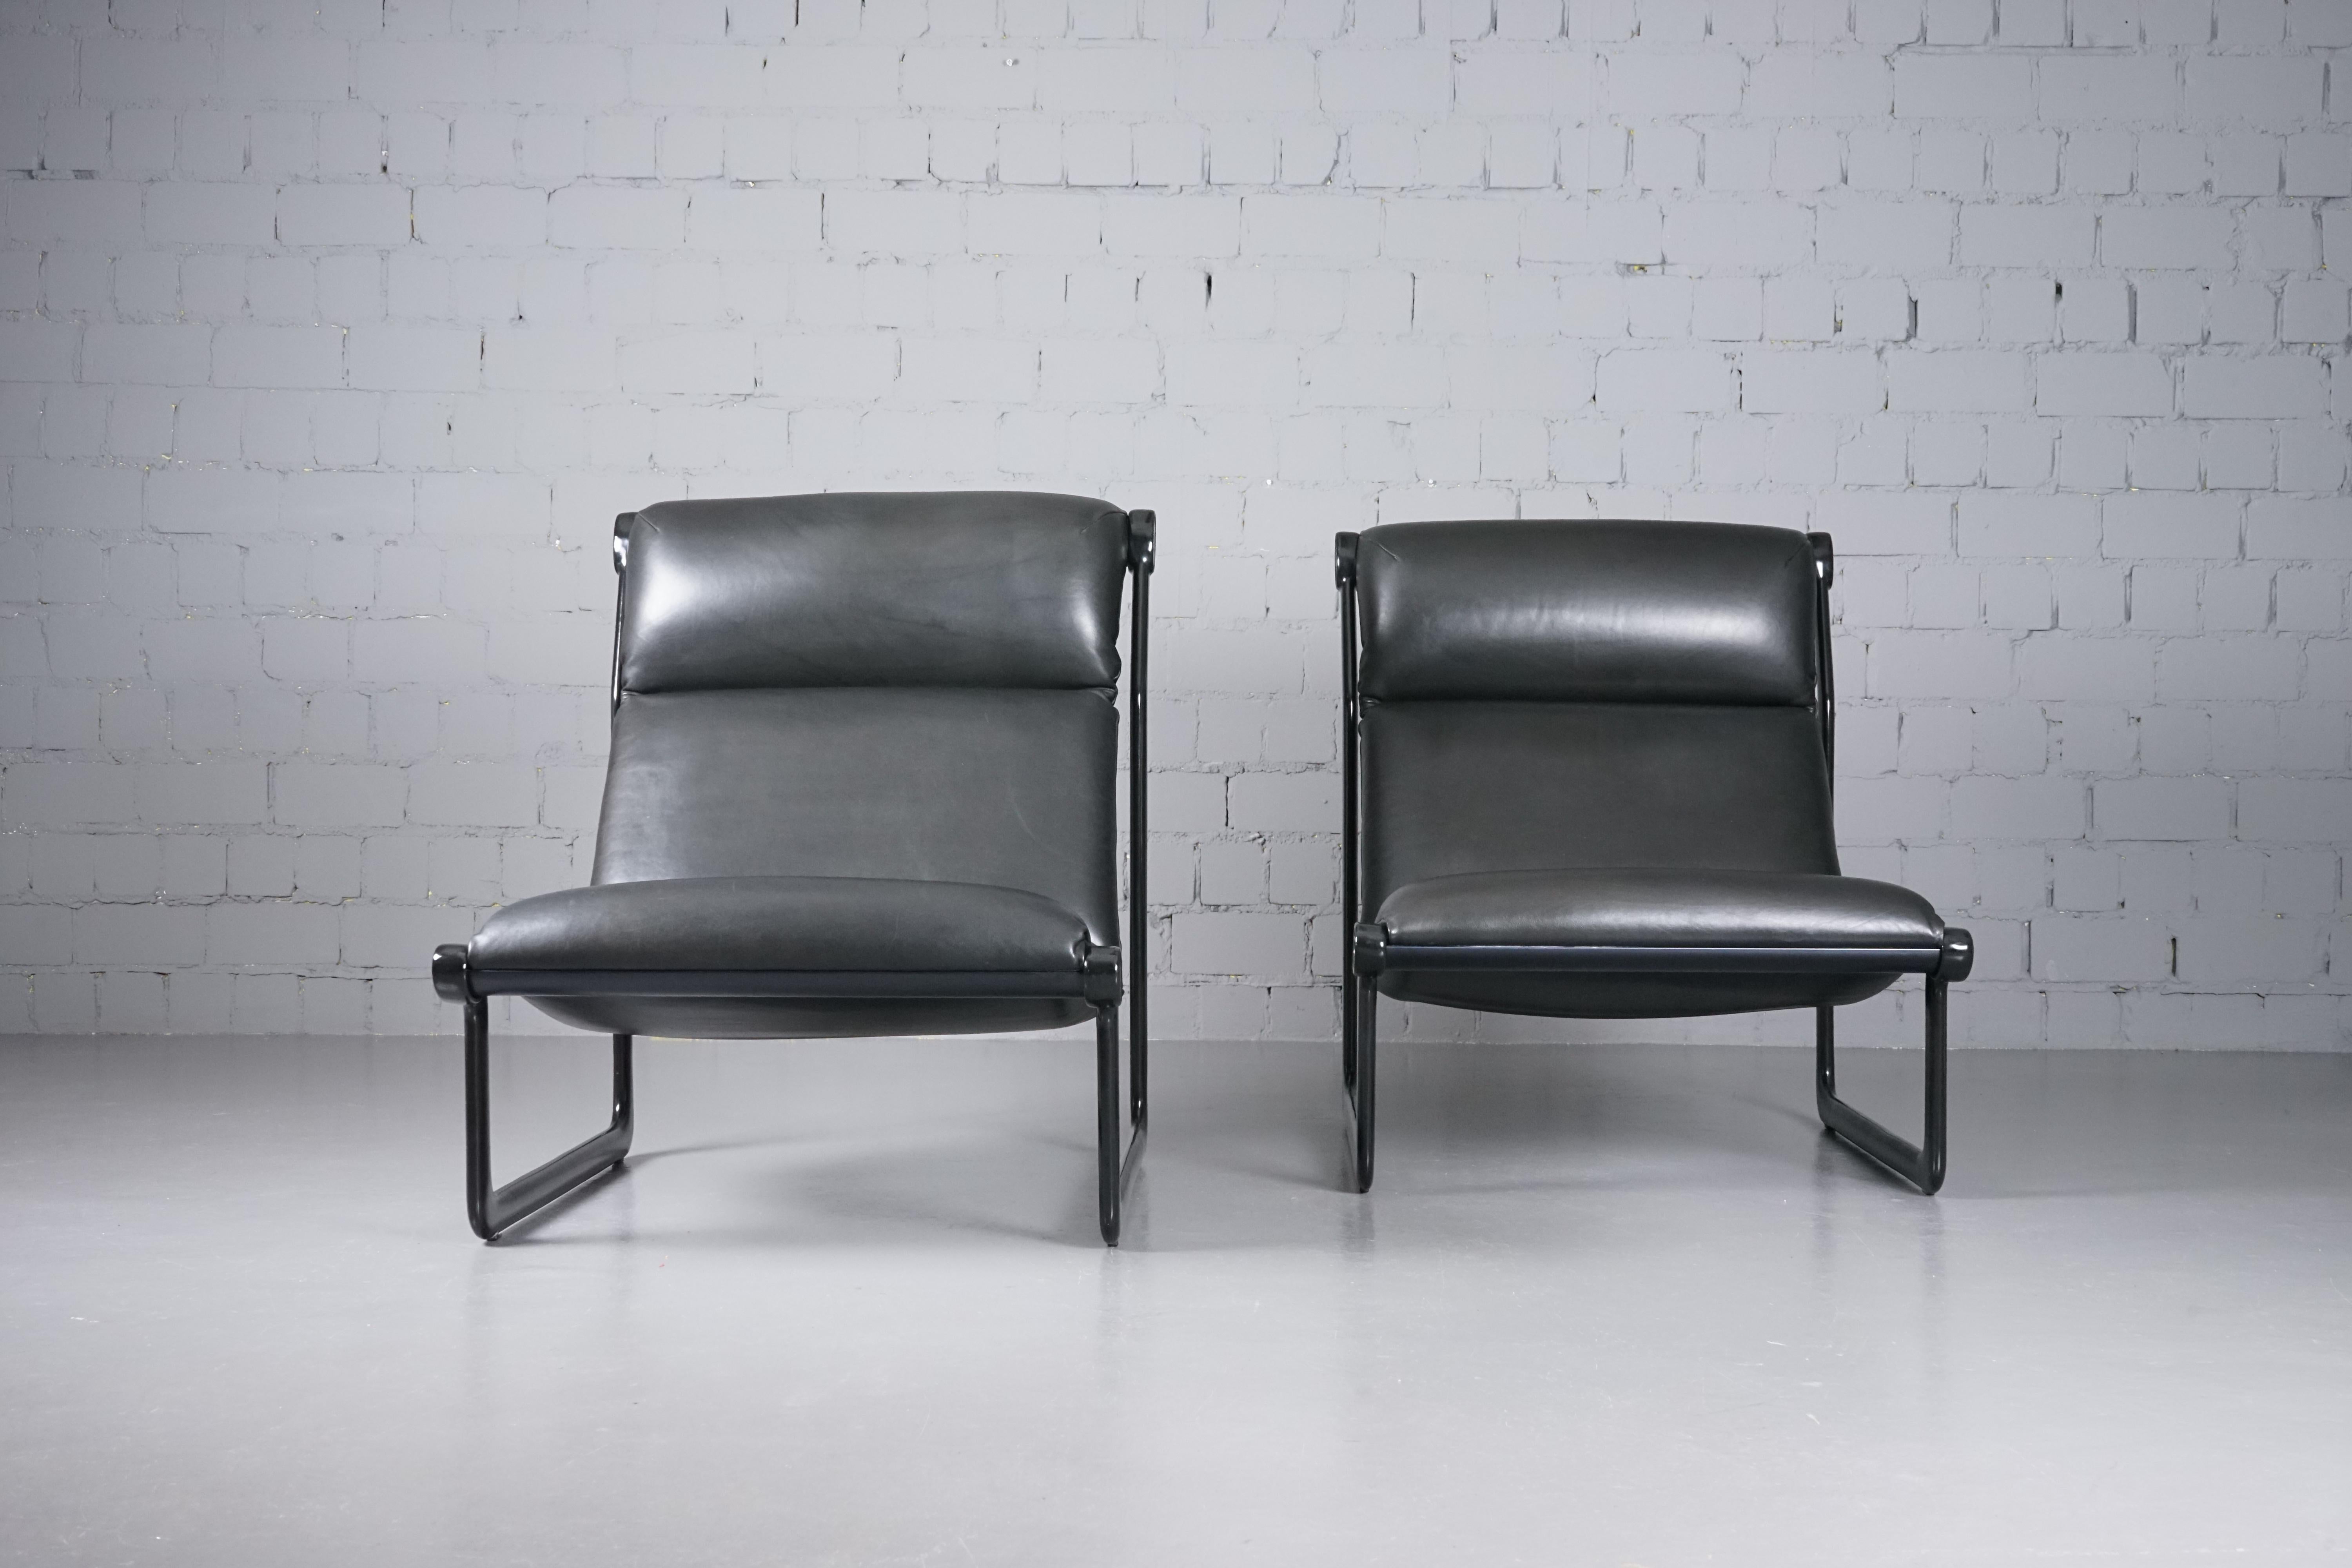 European Arm Chair Modell 2001 by Bruce Hannah & Andrew I. Morrison for Knoll Set of 2 For Sale